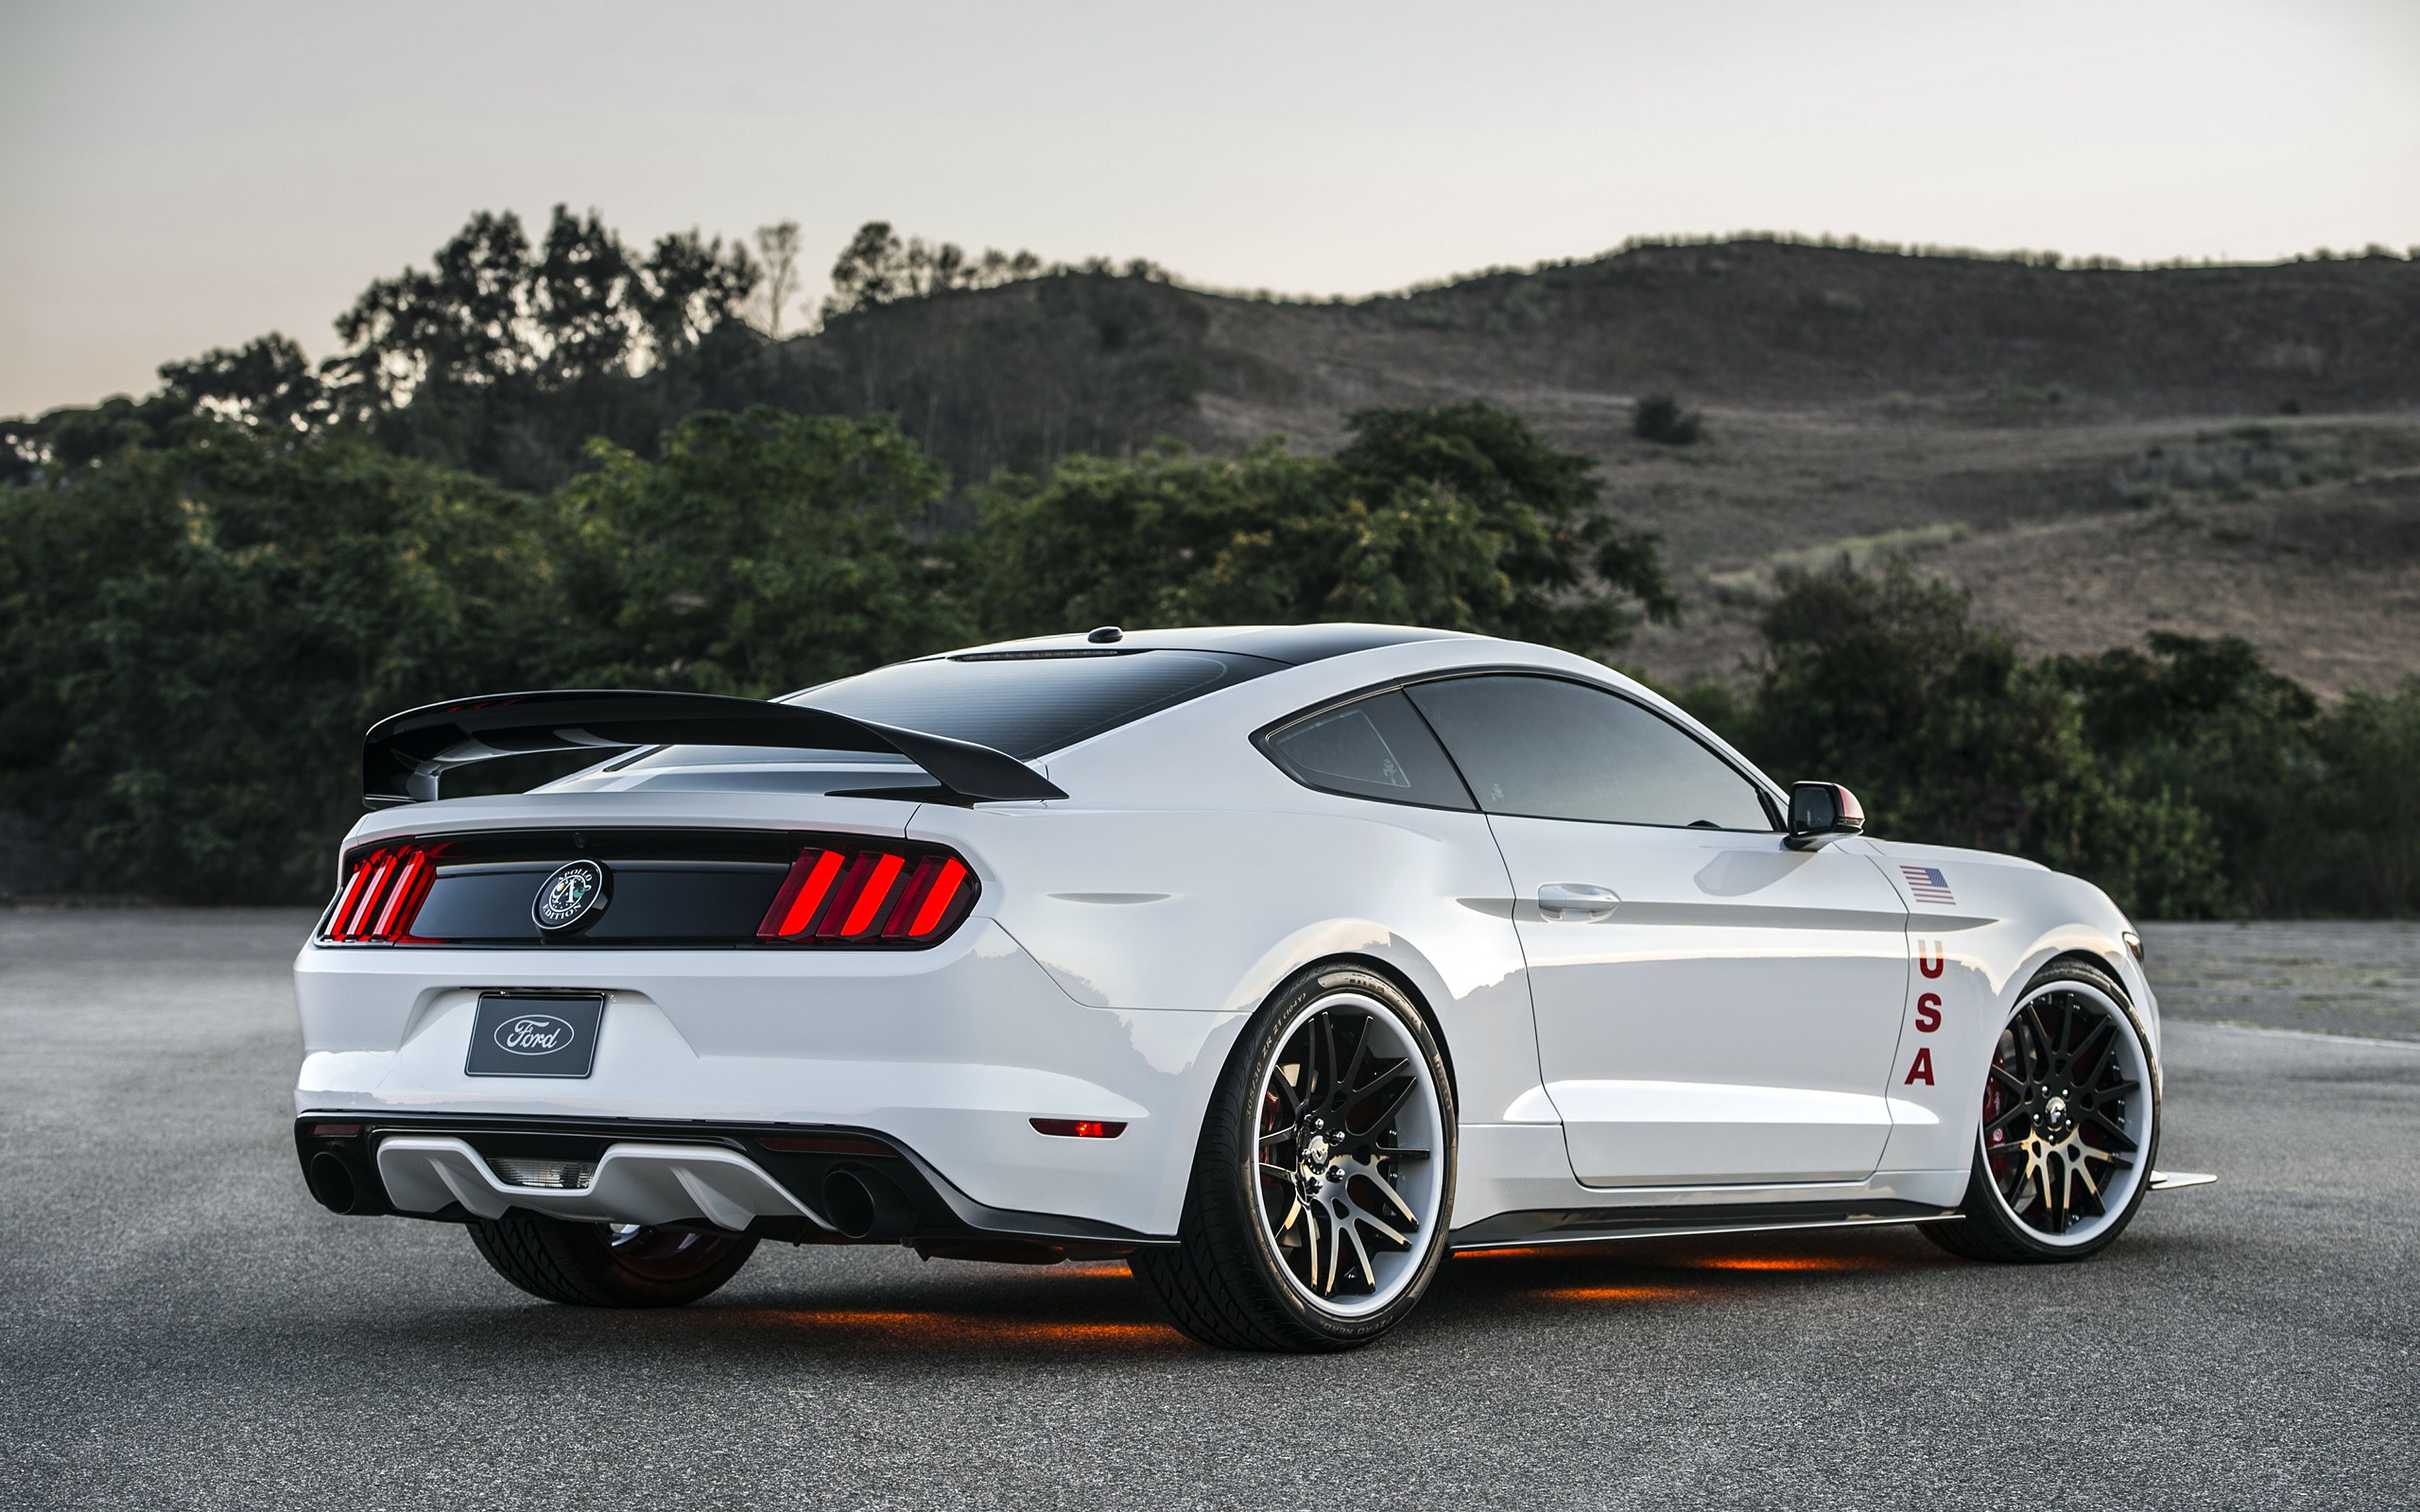 General 2560x1600 Ford Mustang Apollo Edition car muscle cars Ford Ford Mustang white cars vehicle Ford Mustang S550 outdoors asphalt trees landscape American cars